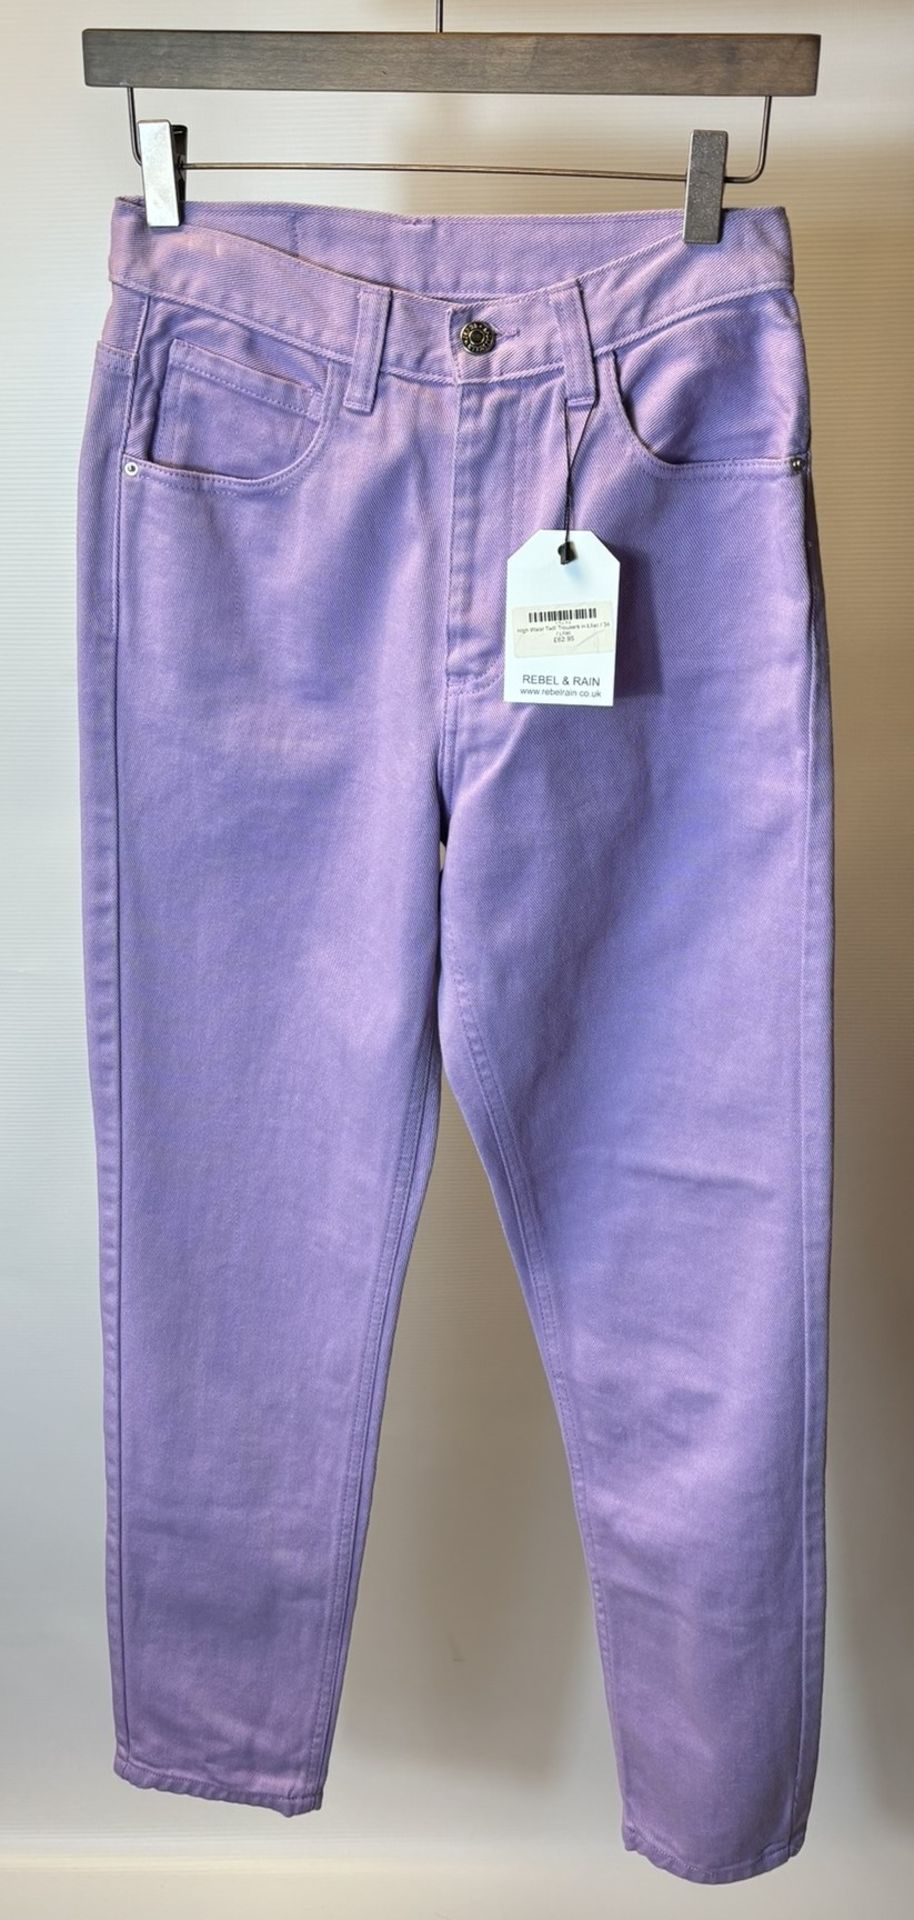 12 x Various Pairs Of Women's Trousers/Jeans As Seen In Photos - Bild 13 aus 36